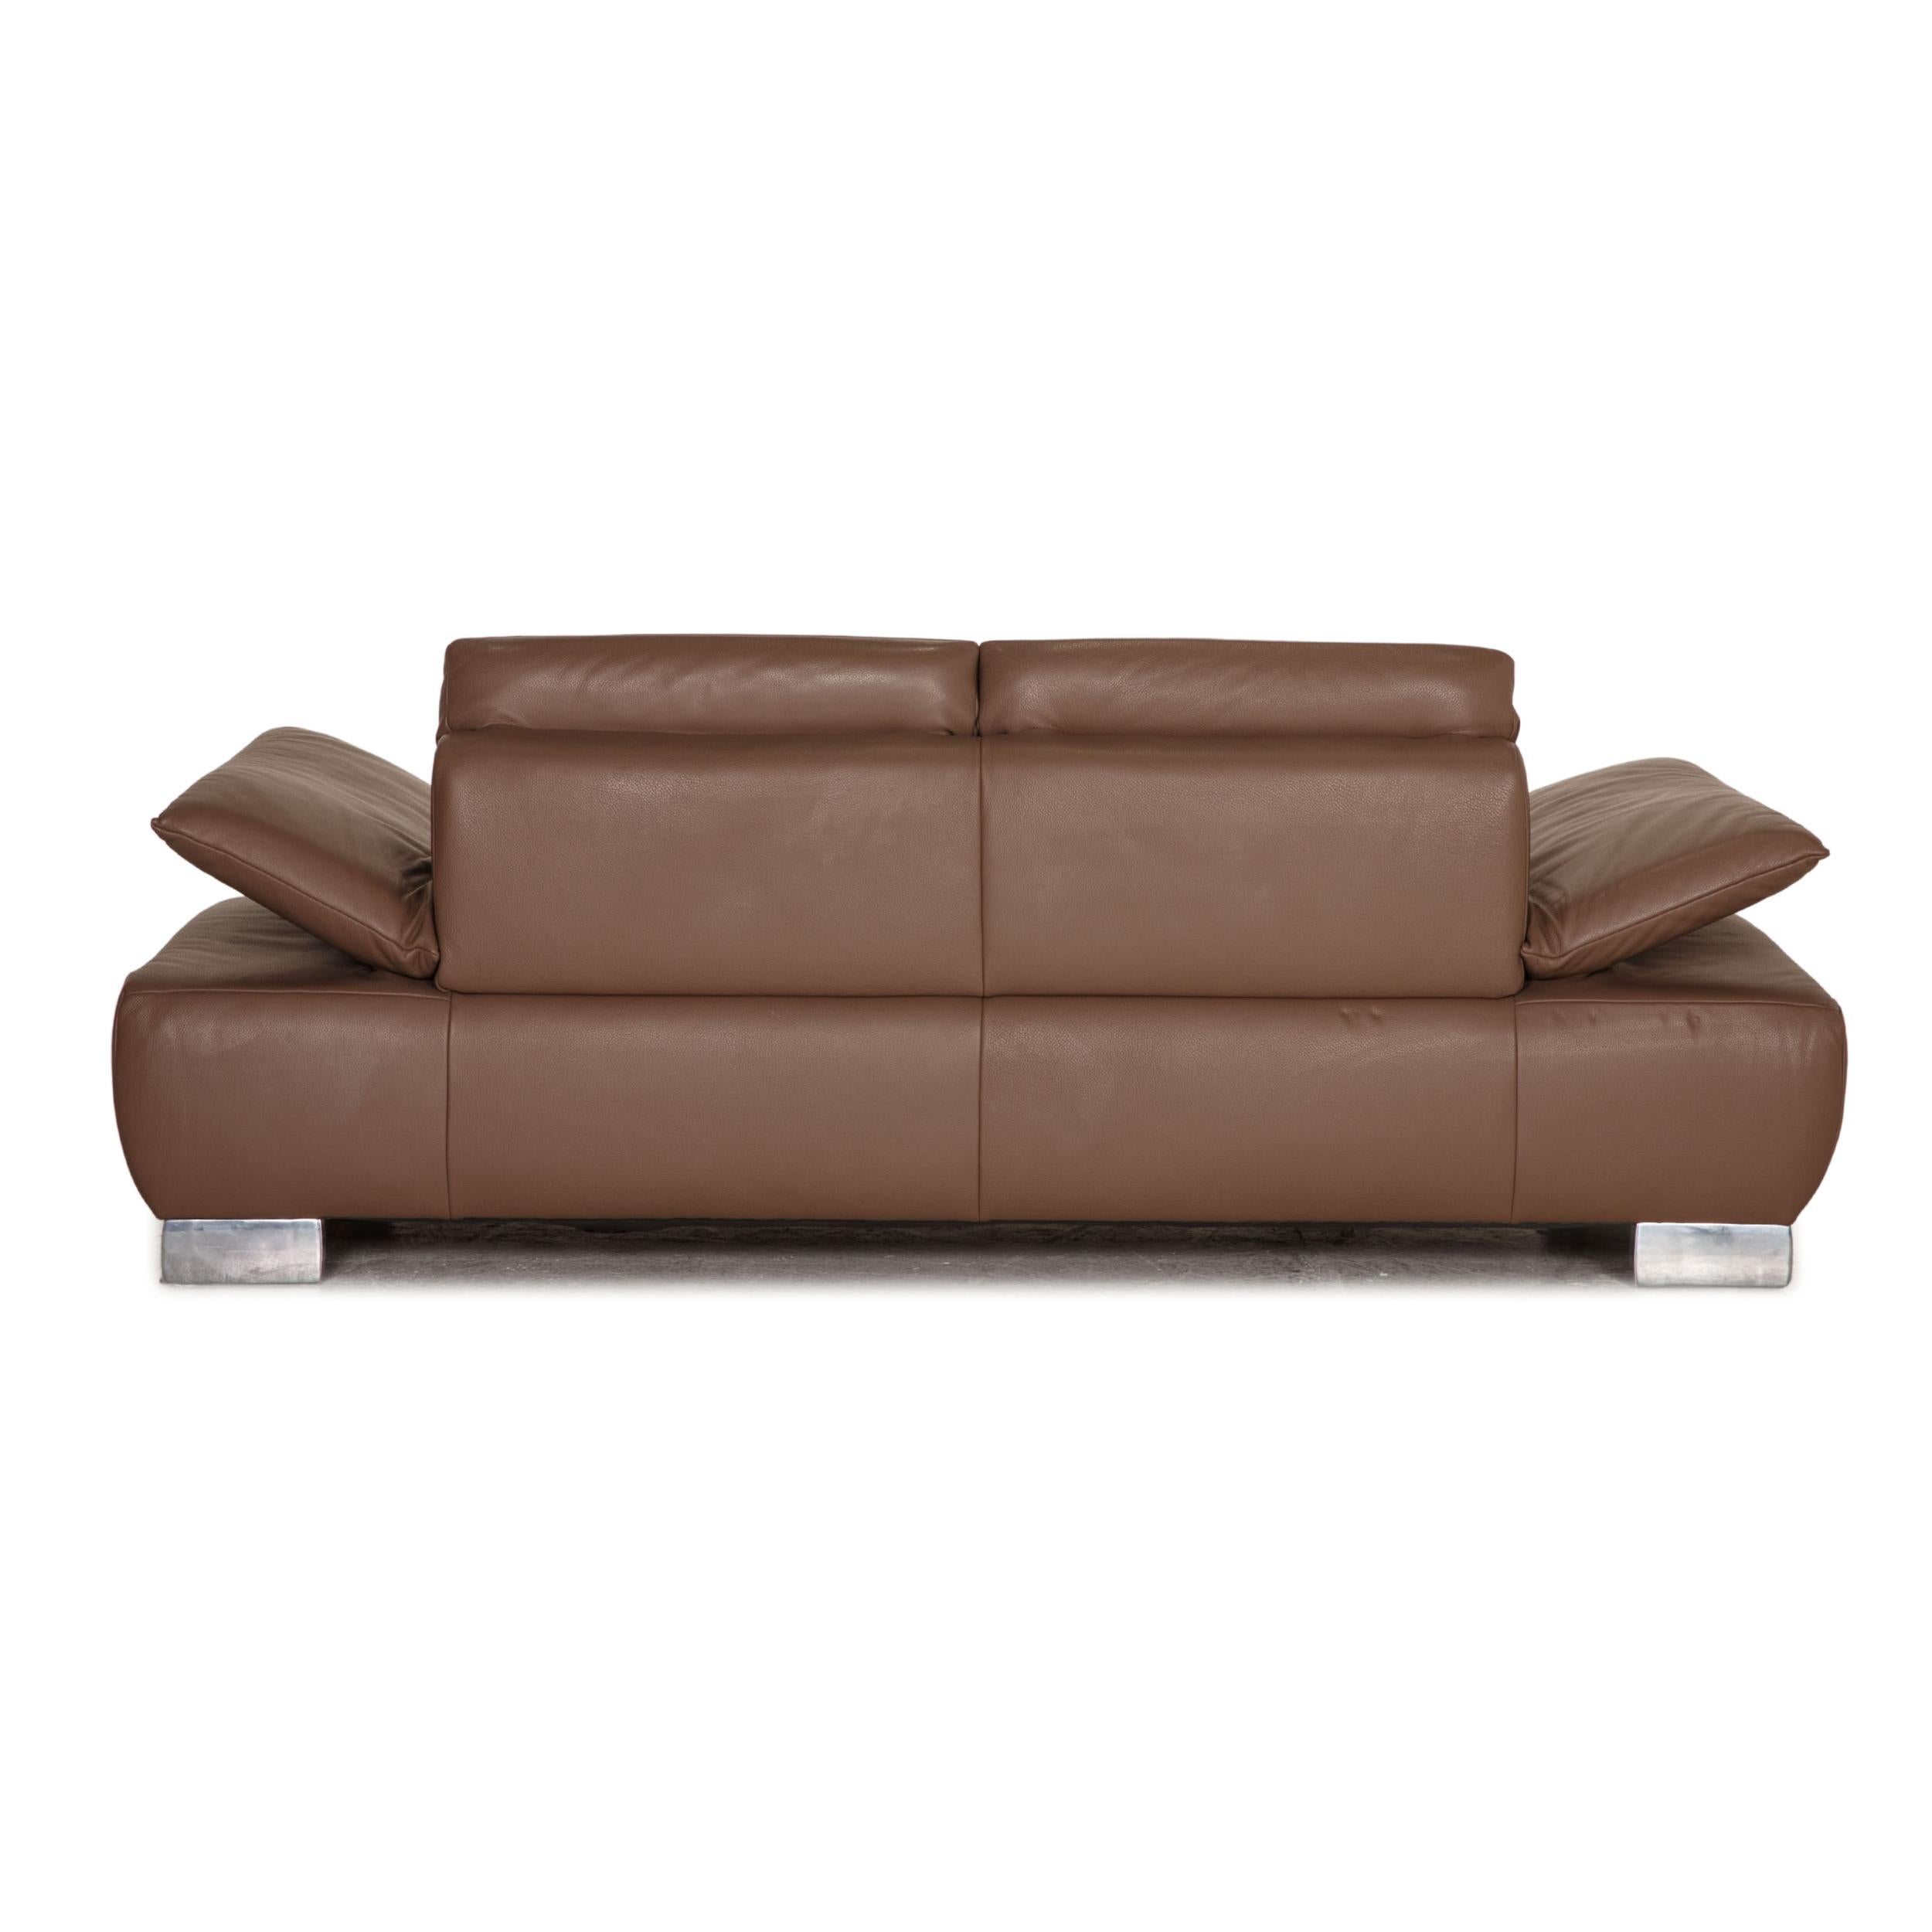 Koinor Volare Leather Sofa Brown Two Seater Couch For Sale 2